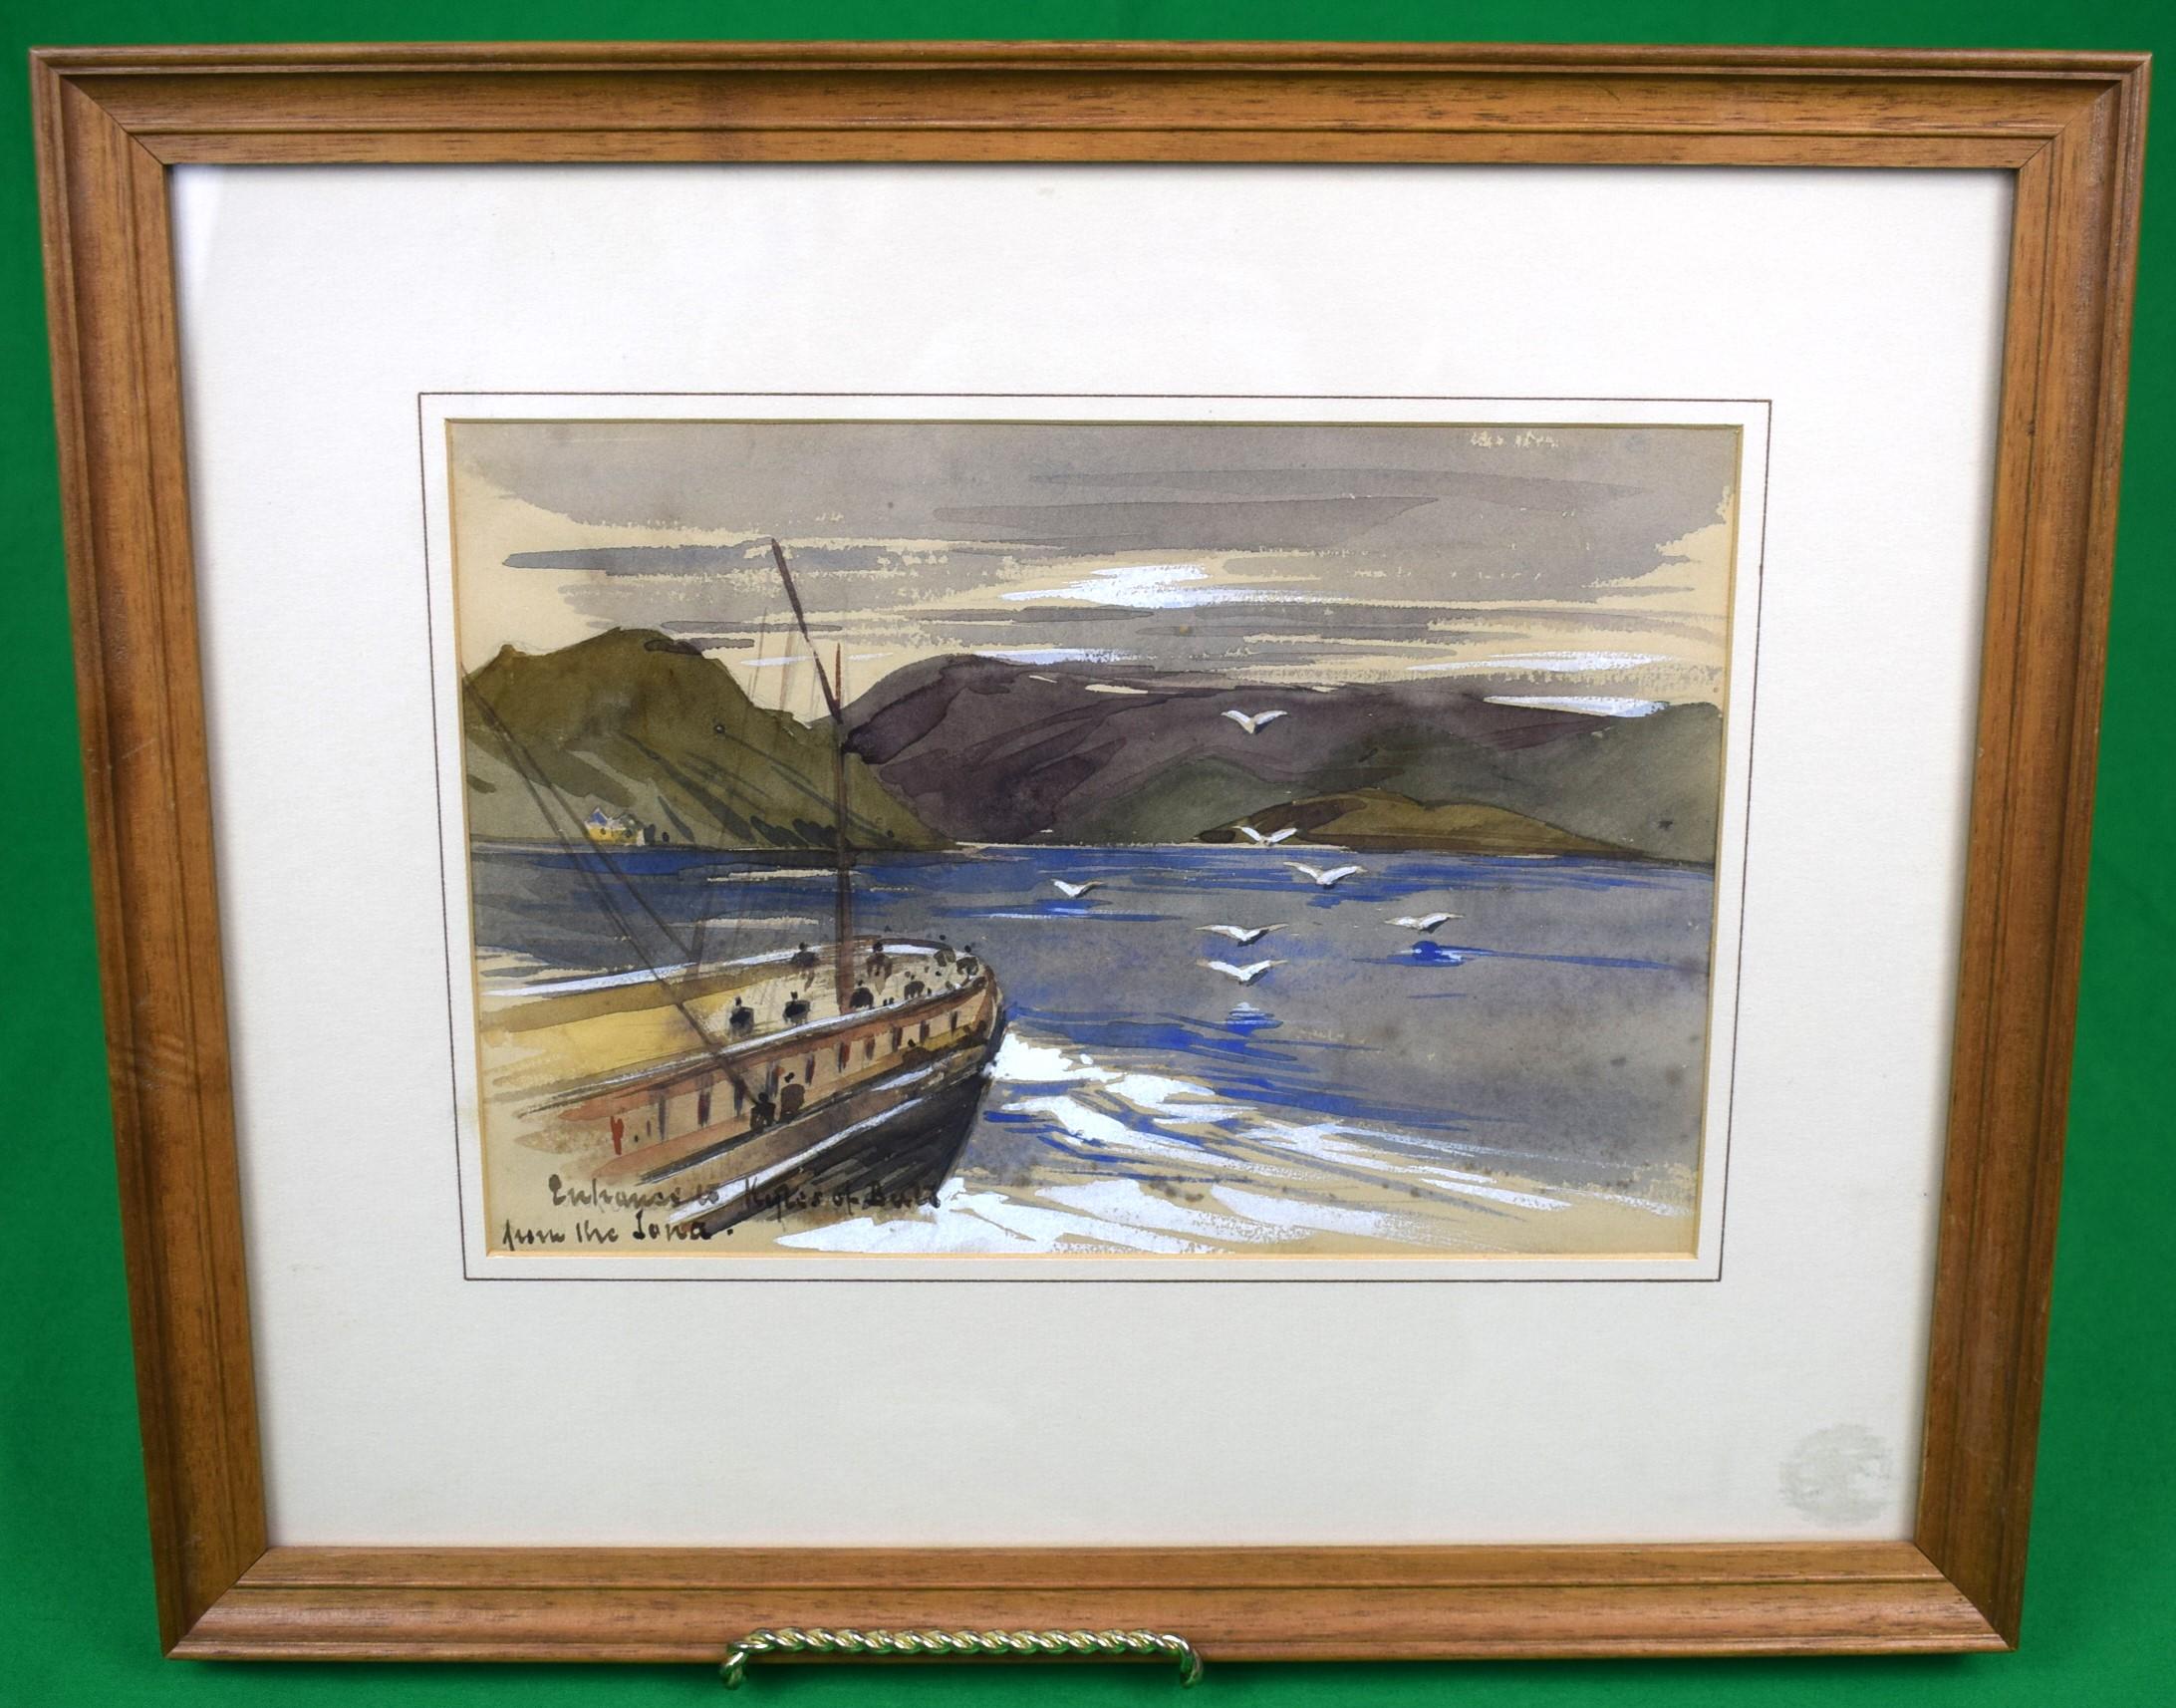 Unknown Landscape Art - "Entrance To The Kyles Of Bute, From The Iona Steamer" Watercolour